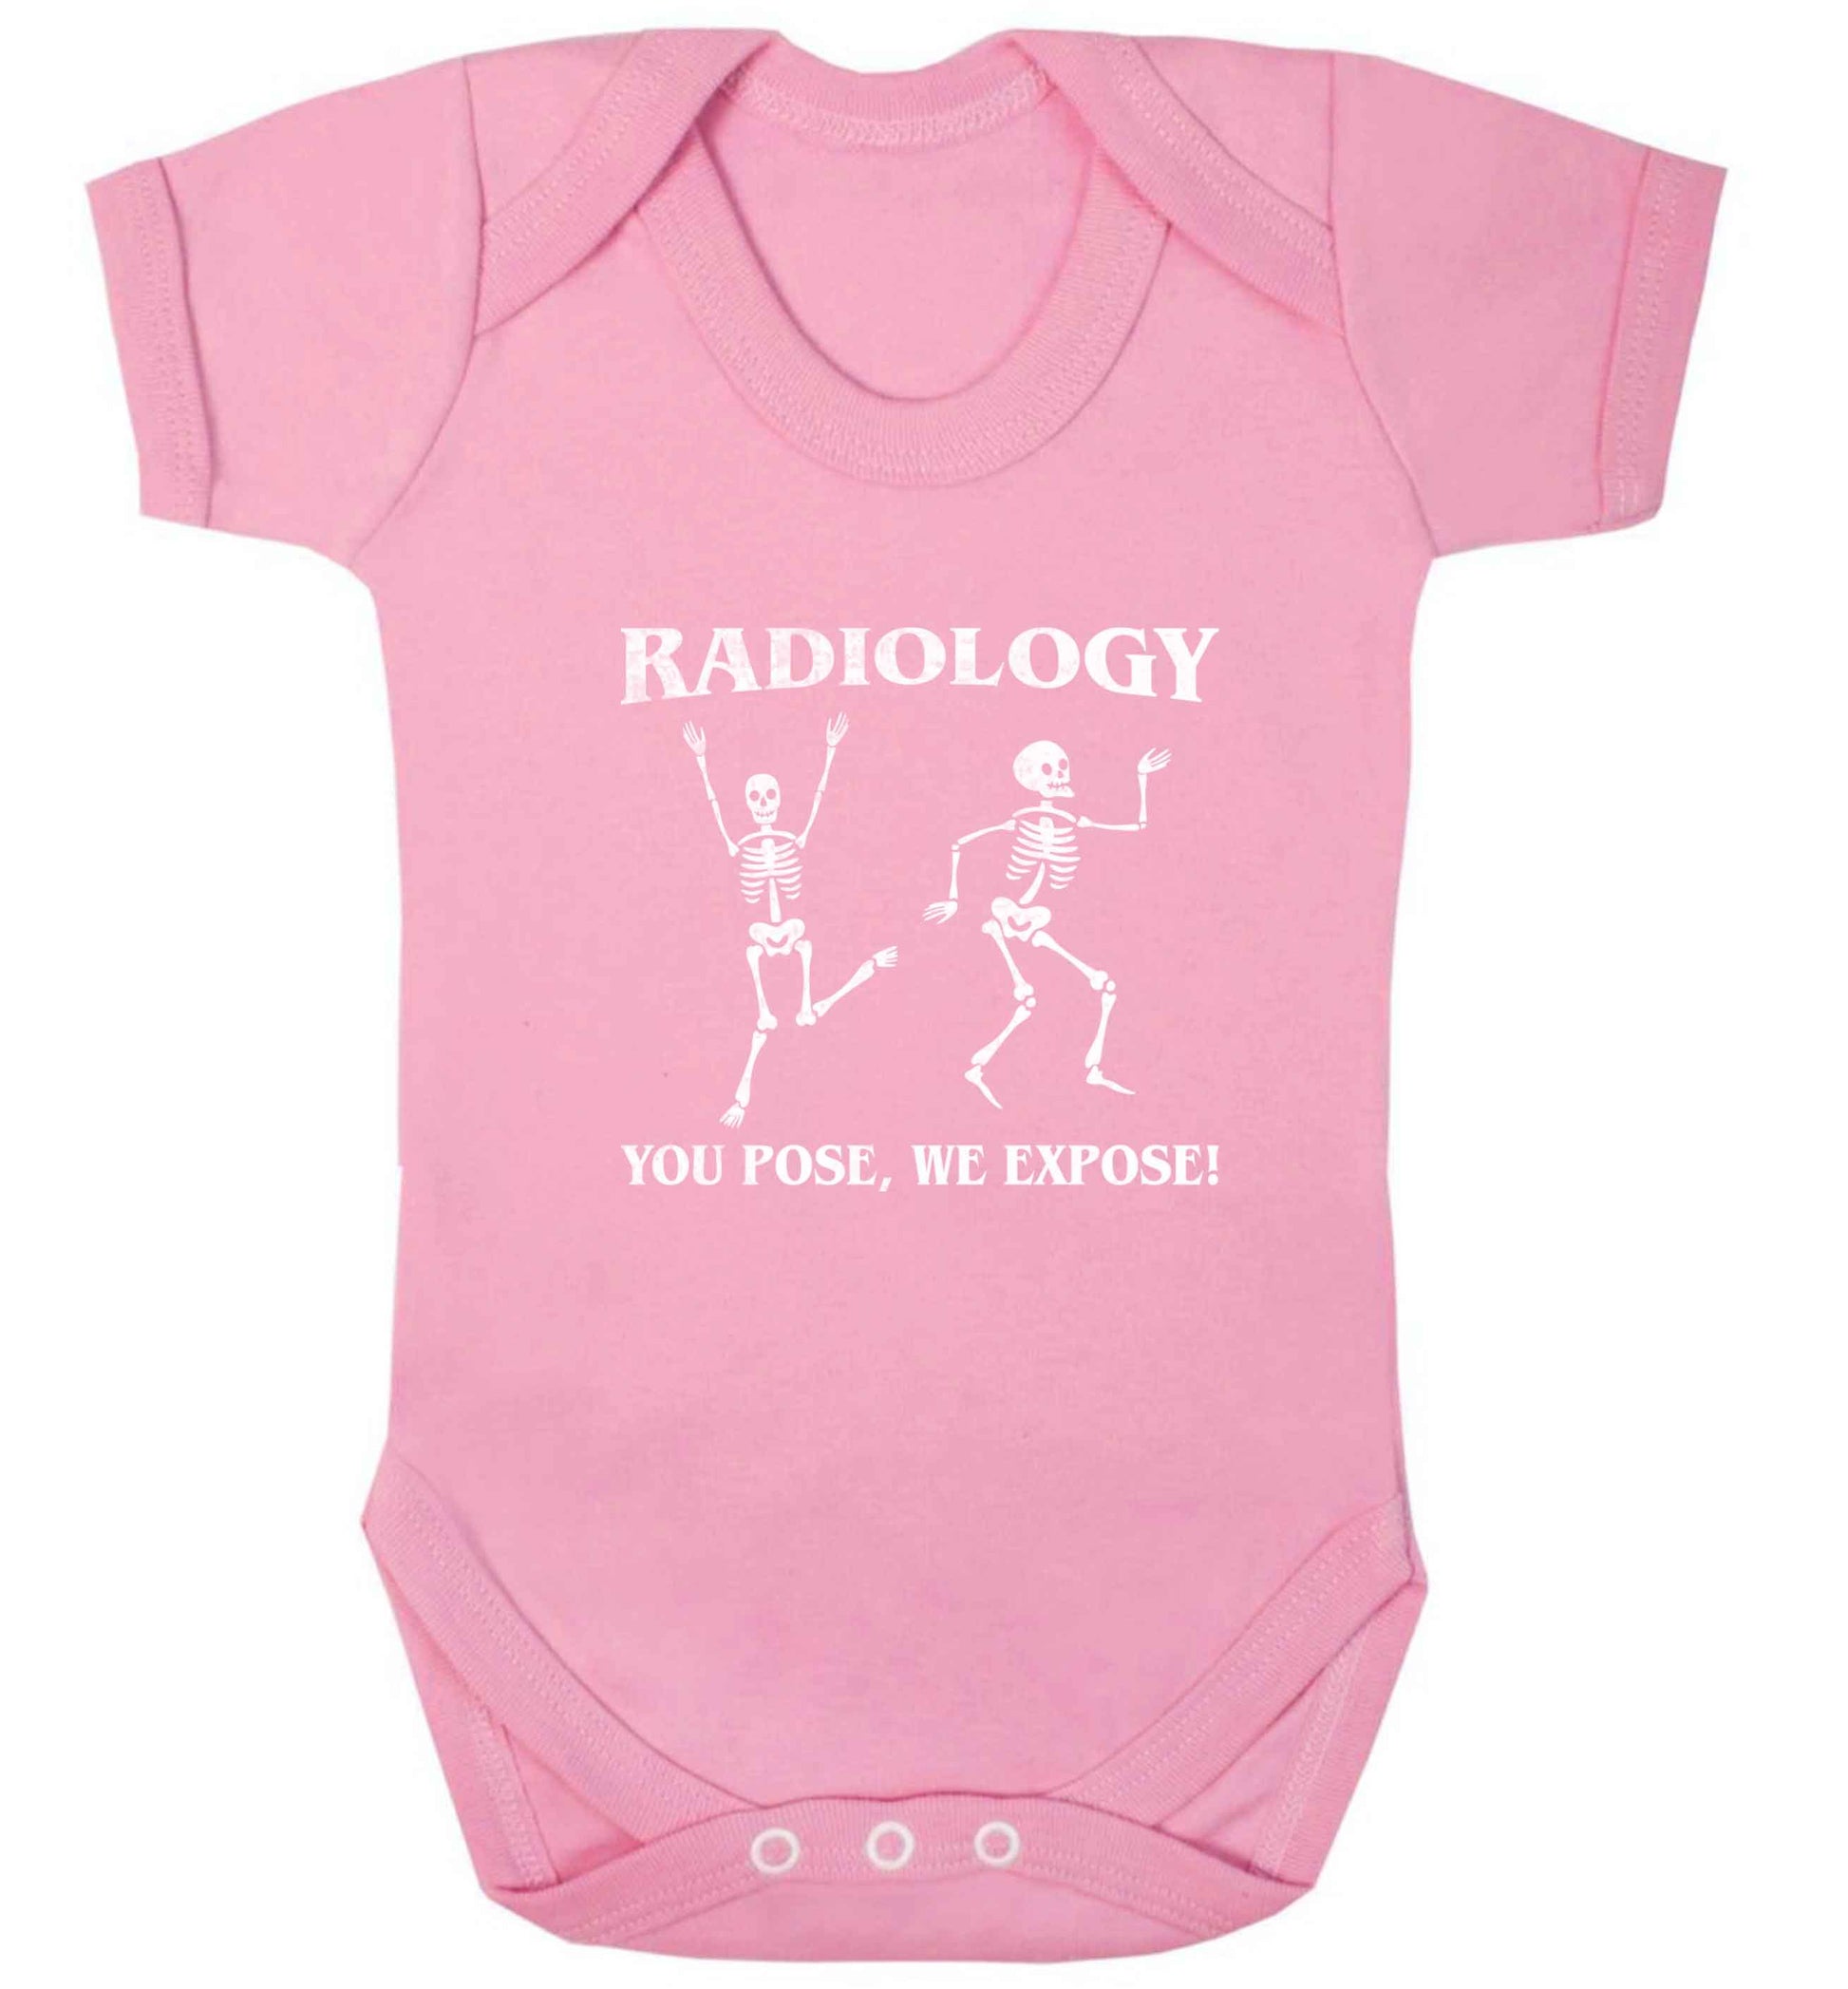 Radiology you pose we expose baby vest pale pink 18-24 months